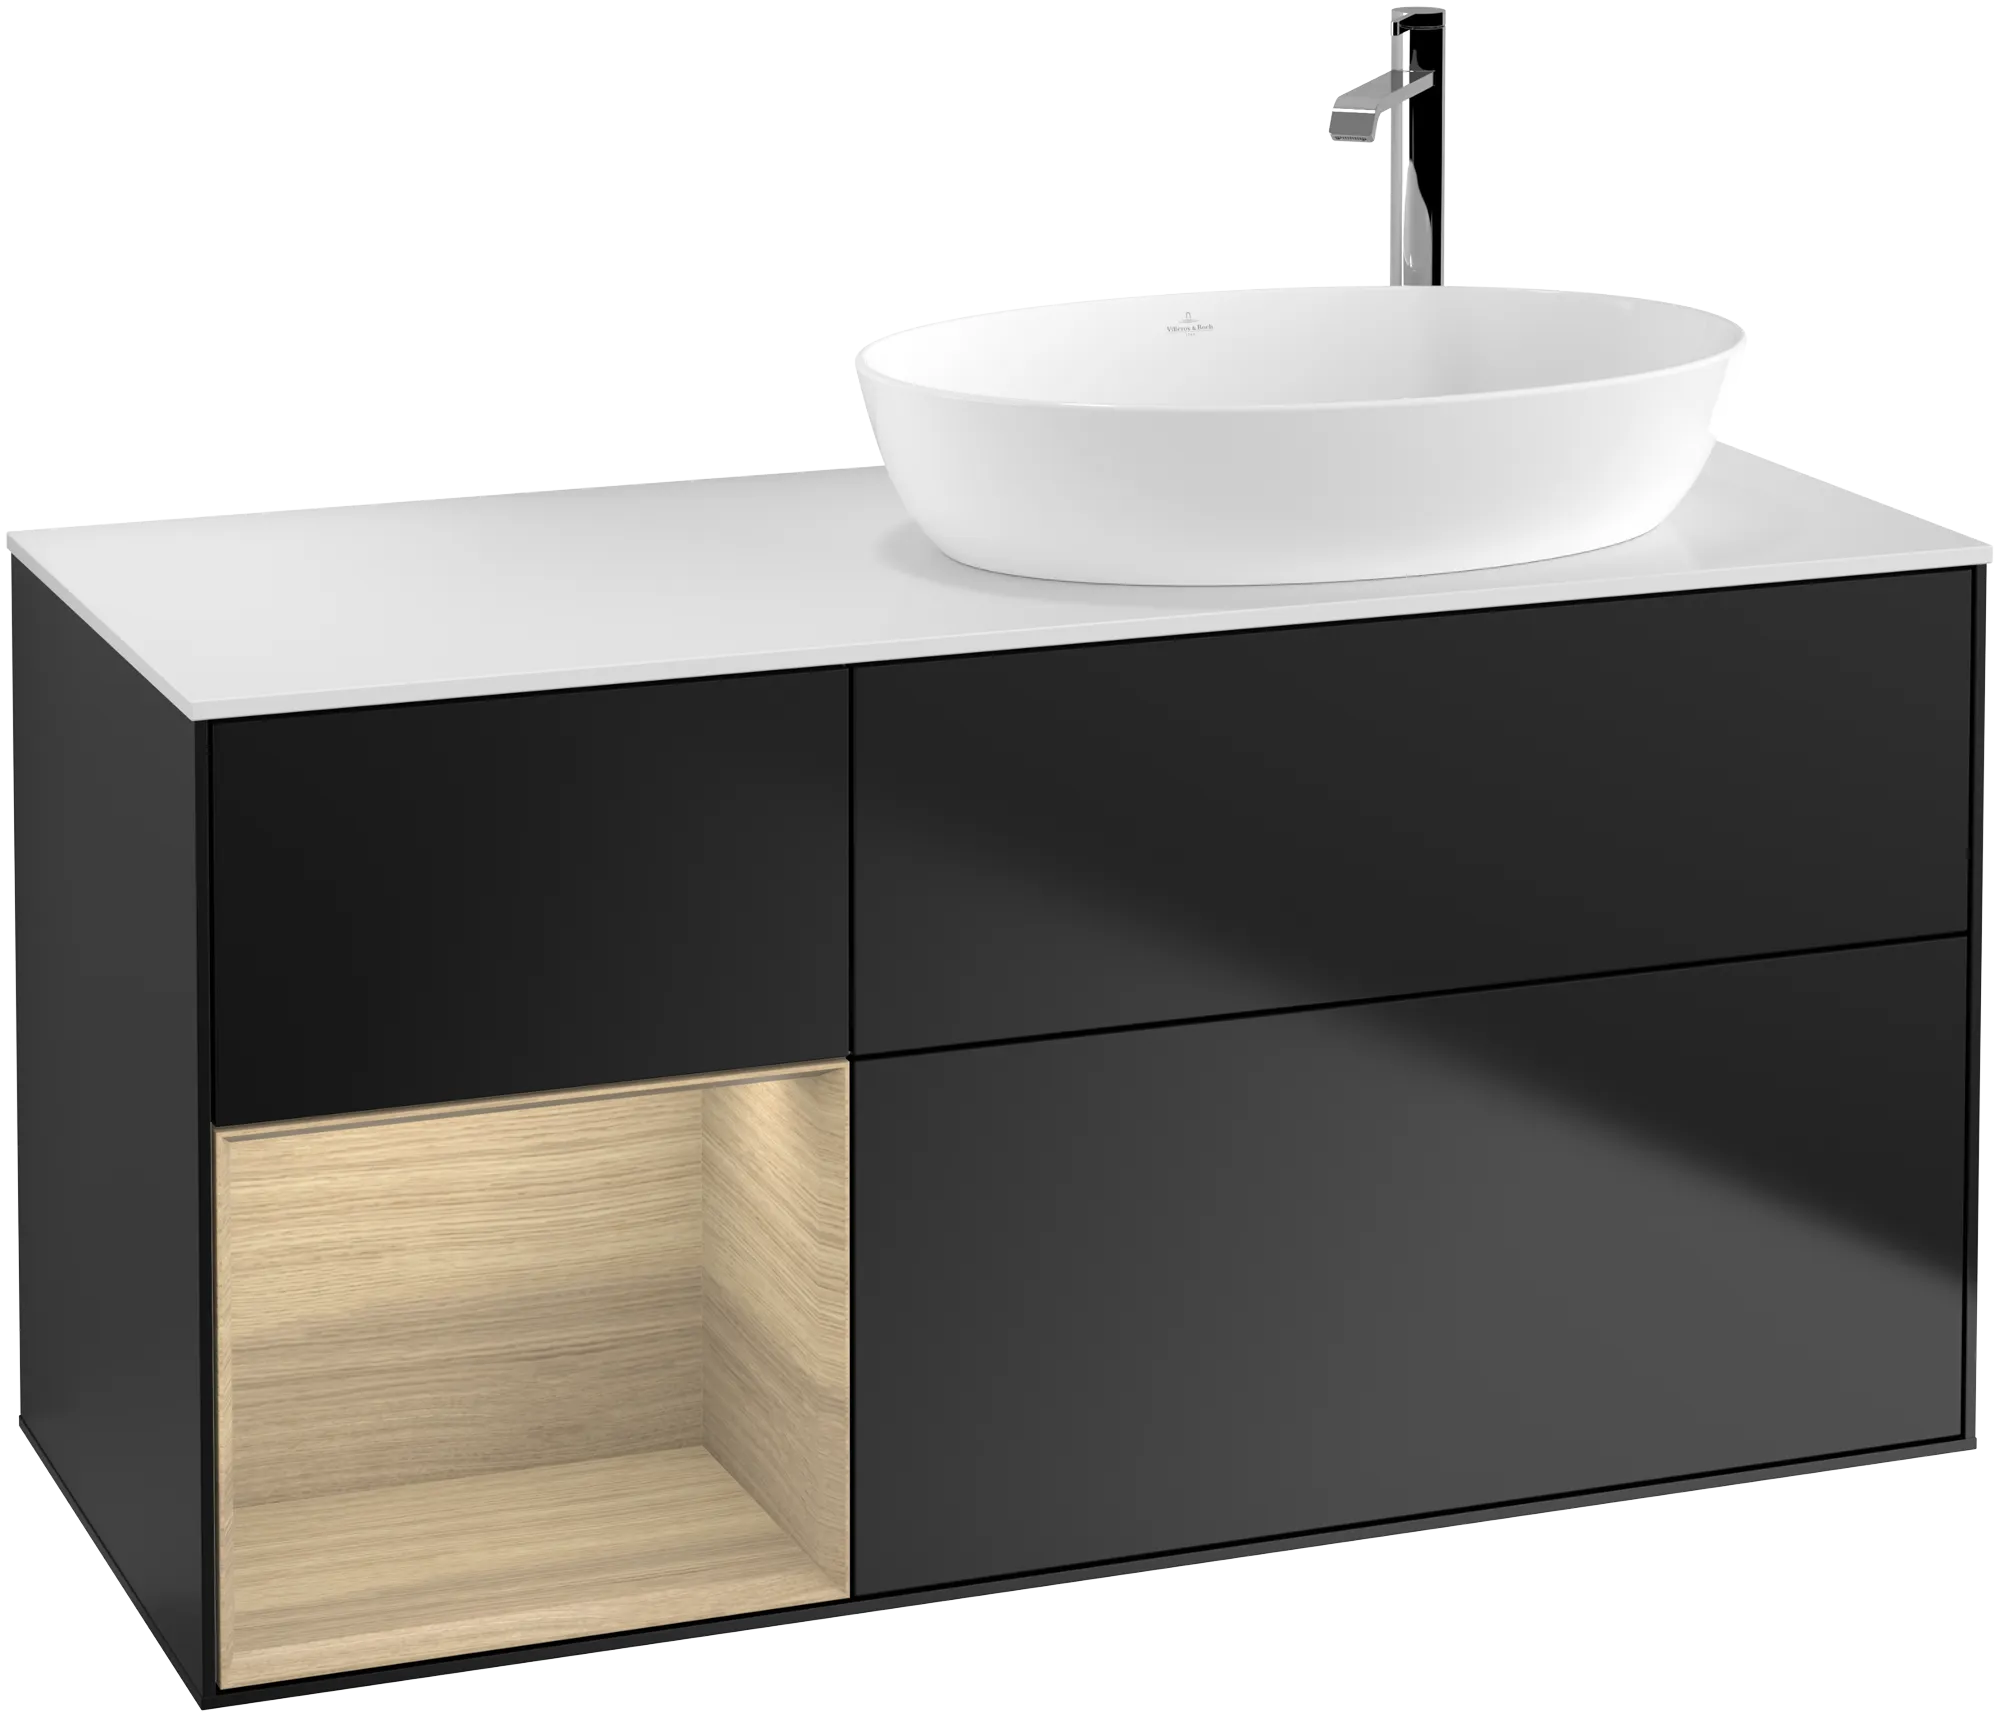 Picture of VILLEROY BOCH Finion Vanity unit, with lighting, 3 pull-out compartments, 1200 x 603 x 501 mm, Black Matt Lacquer / Oak Veneer / Glass White Matt #G921PCPD